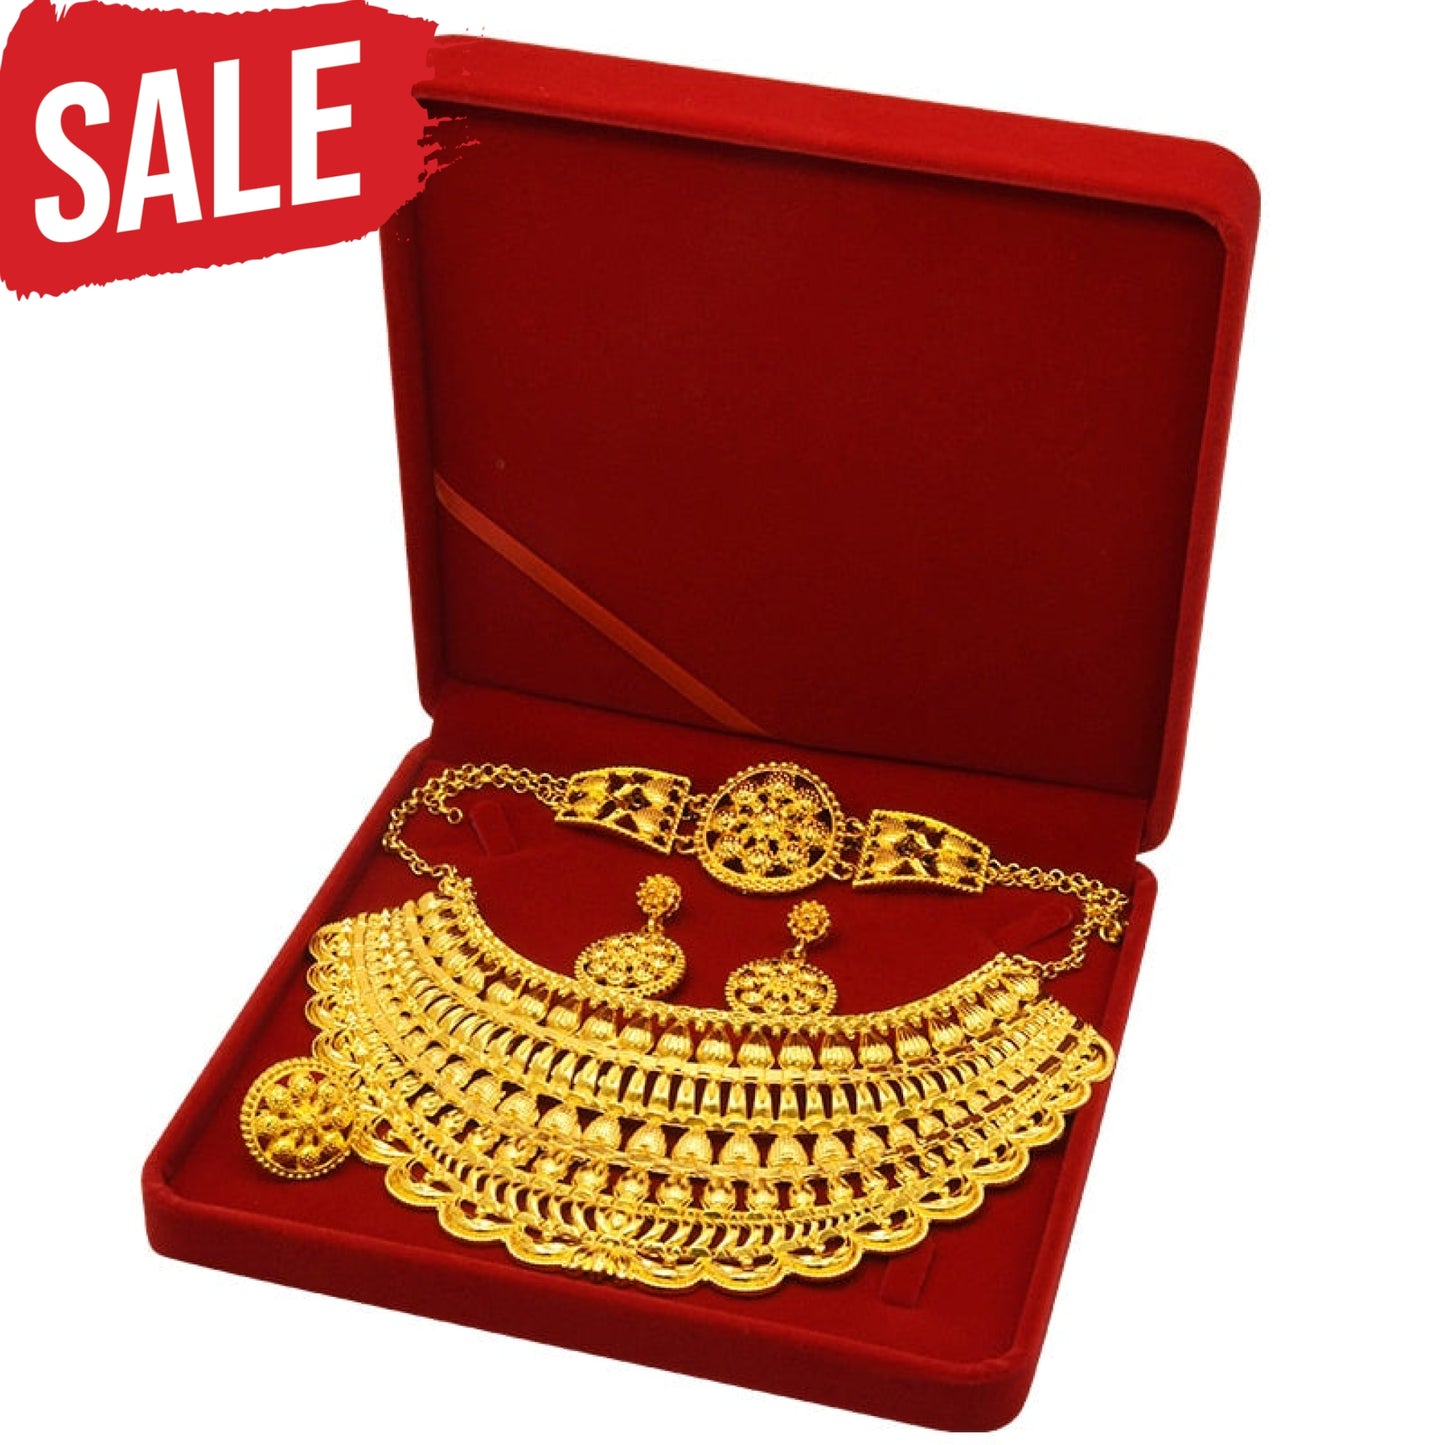 Gold Plated Necklace Jewelry Set Gold Plated Necklace Jewelry Set Gold Plated Necklace Jewelry Set 